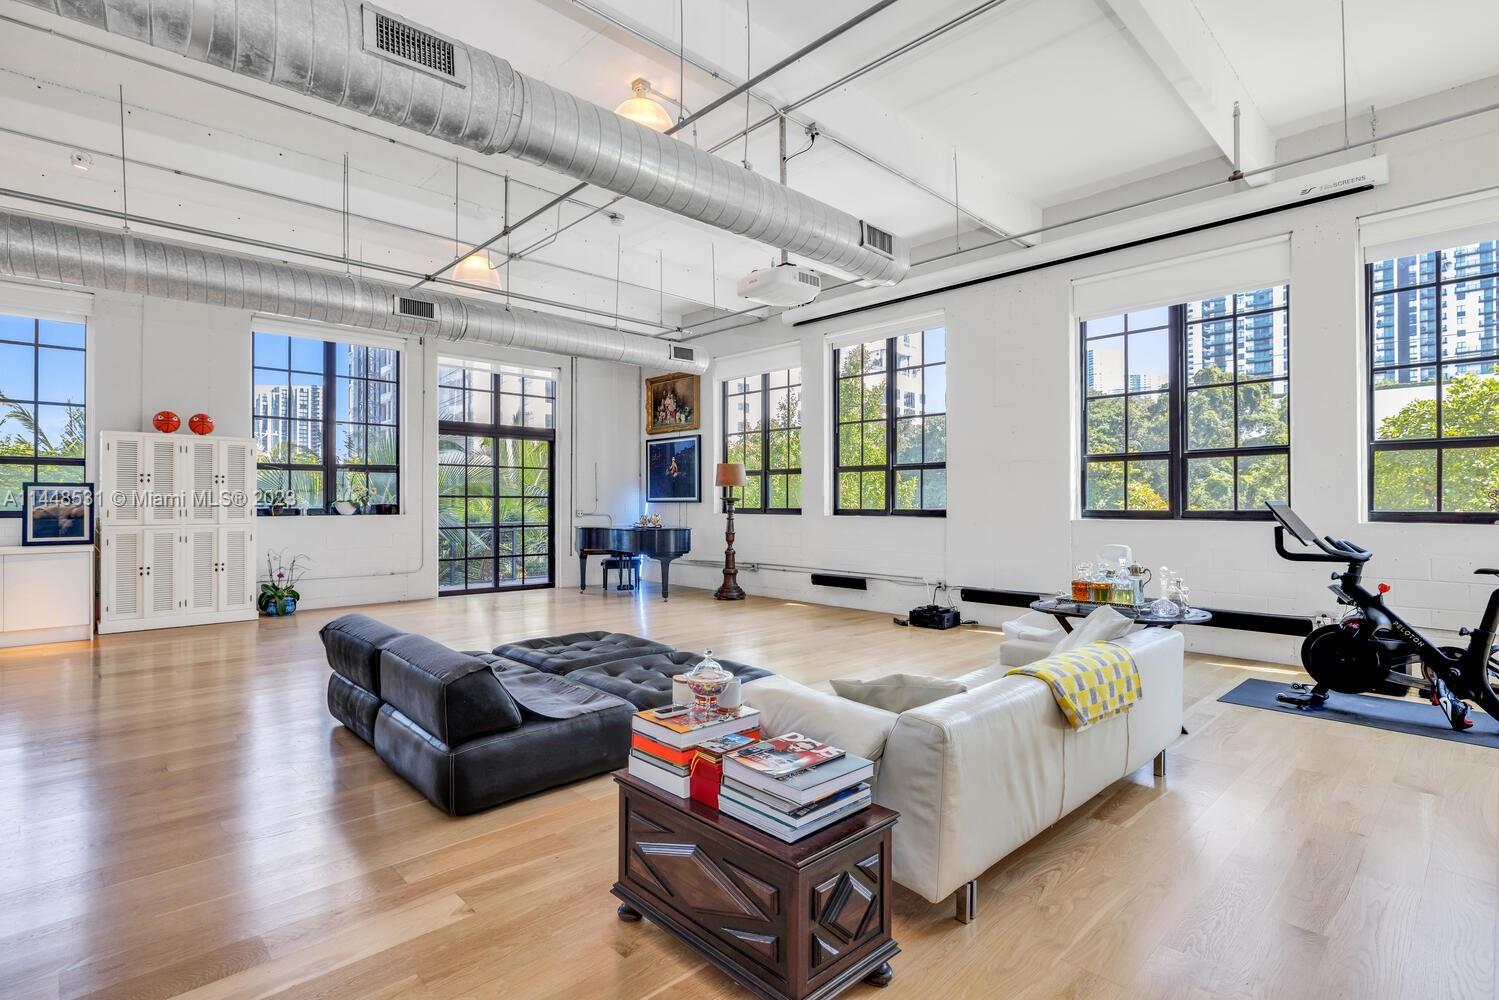 Discover the epitome of urban living in this exceptional New York-style loft condo, a rarity in Miami's Arts & Entertainment district - minutes away from Wynwood, Downtown, Edgewater and the Design District. With its unique combination of industrial charm and contemporary elegance, this corner unit is a true gem that is perfect for entertaining. 
This home boasts soaring 15-foot ceilings, oversized windows with electric blinds allowing in an abundance of natural light, beautiful light oak hardwood floors, renovated bathrooms and kitchen, and an impressive movie projector screen measuring 13' x 18'. One parking space with EV charger is included with room to add a lift for a second vehicle.